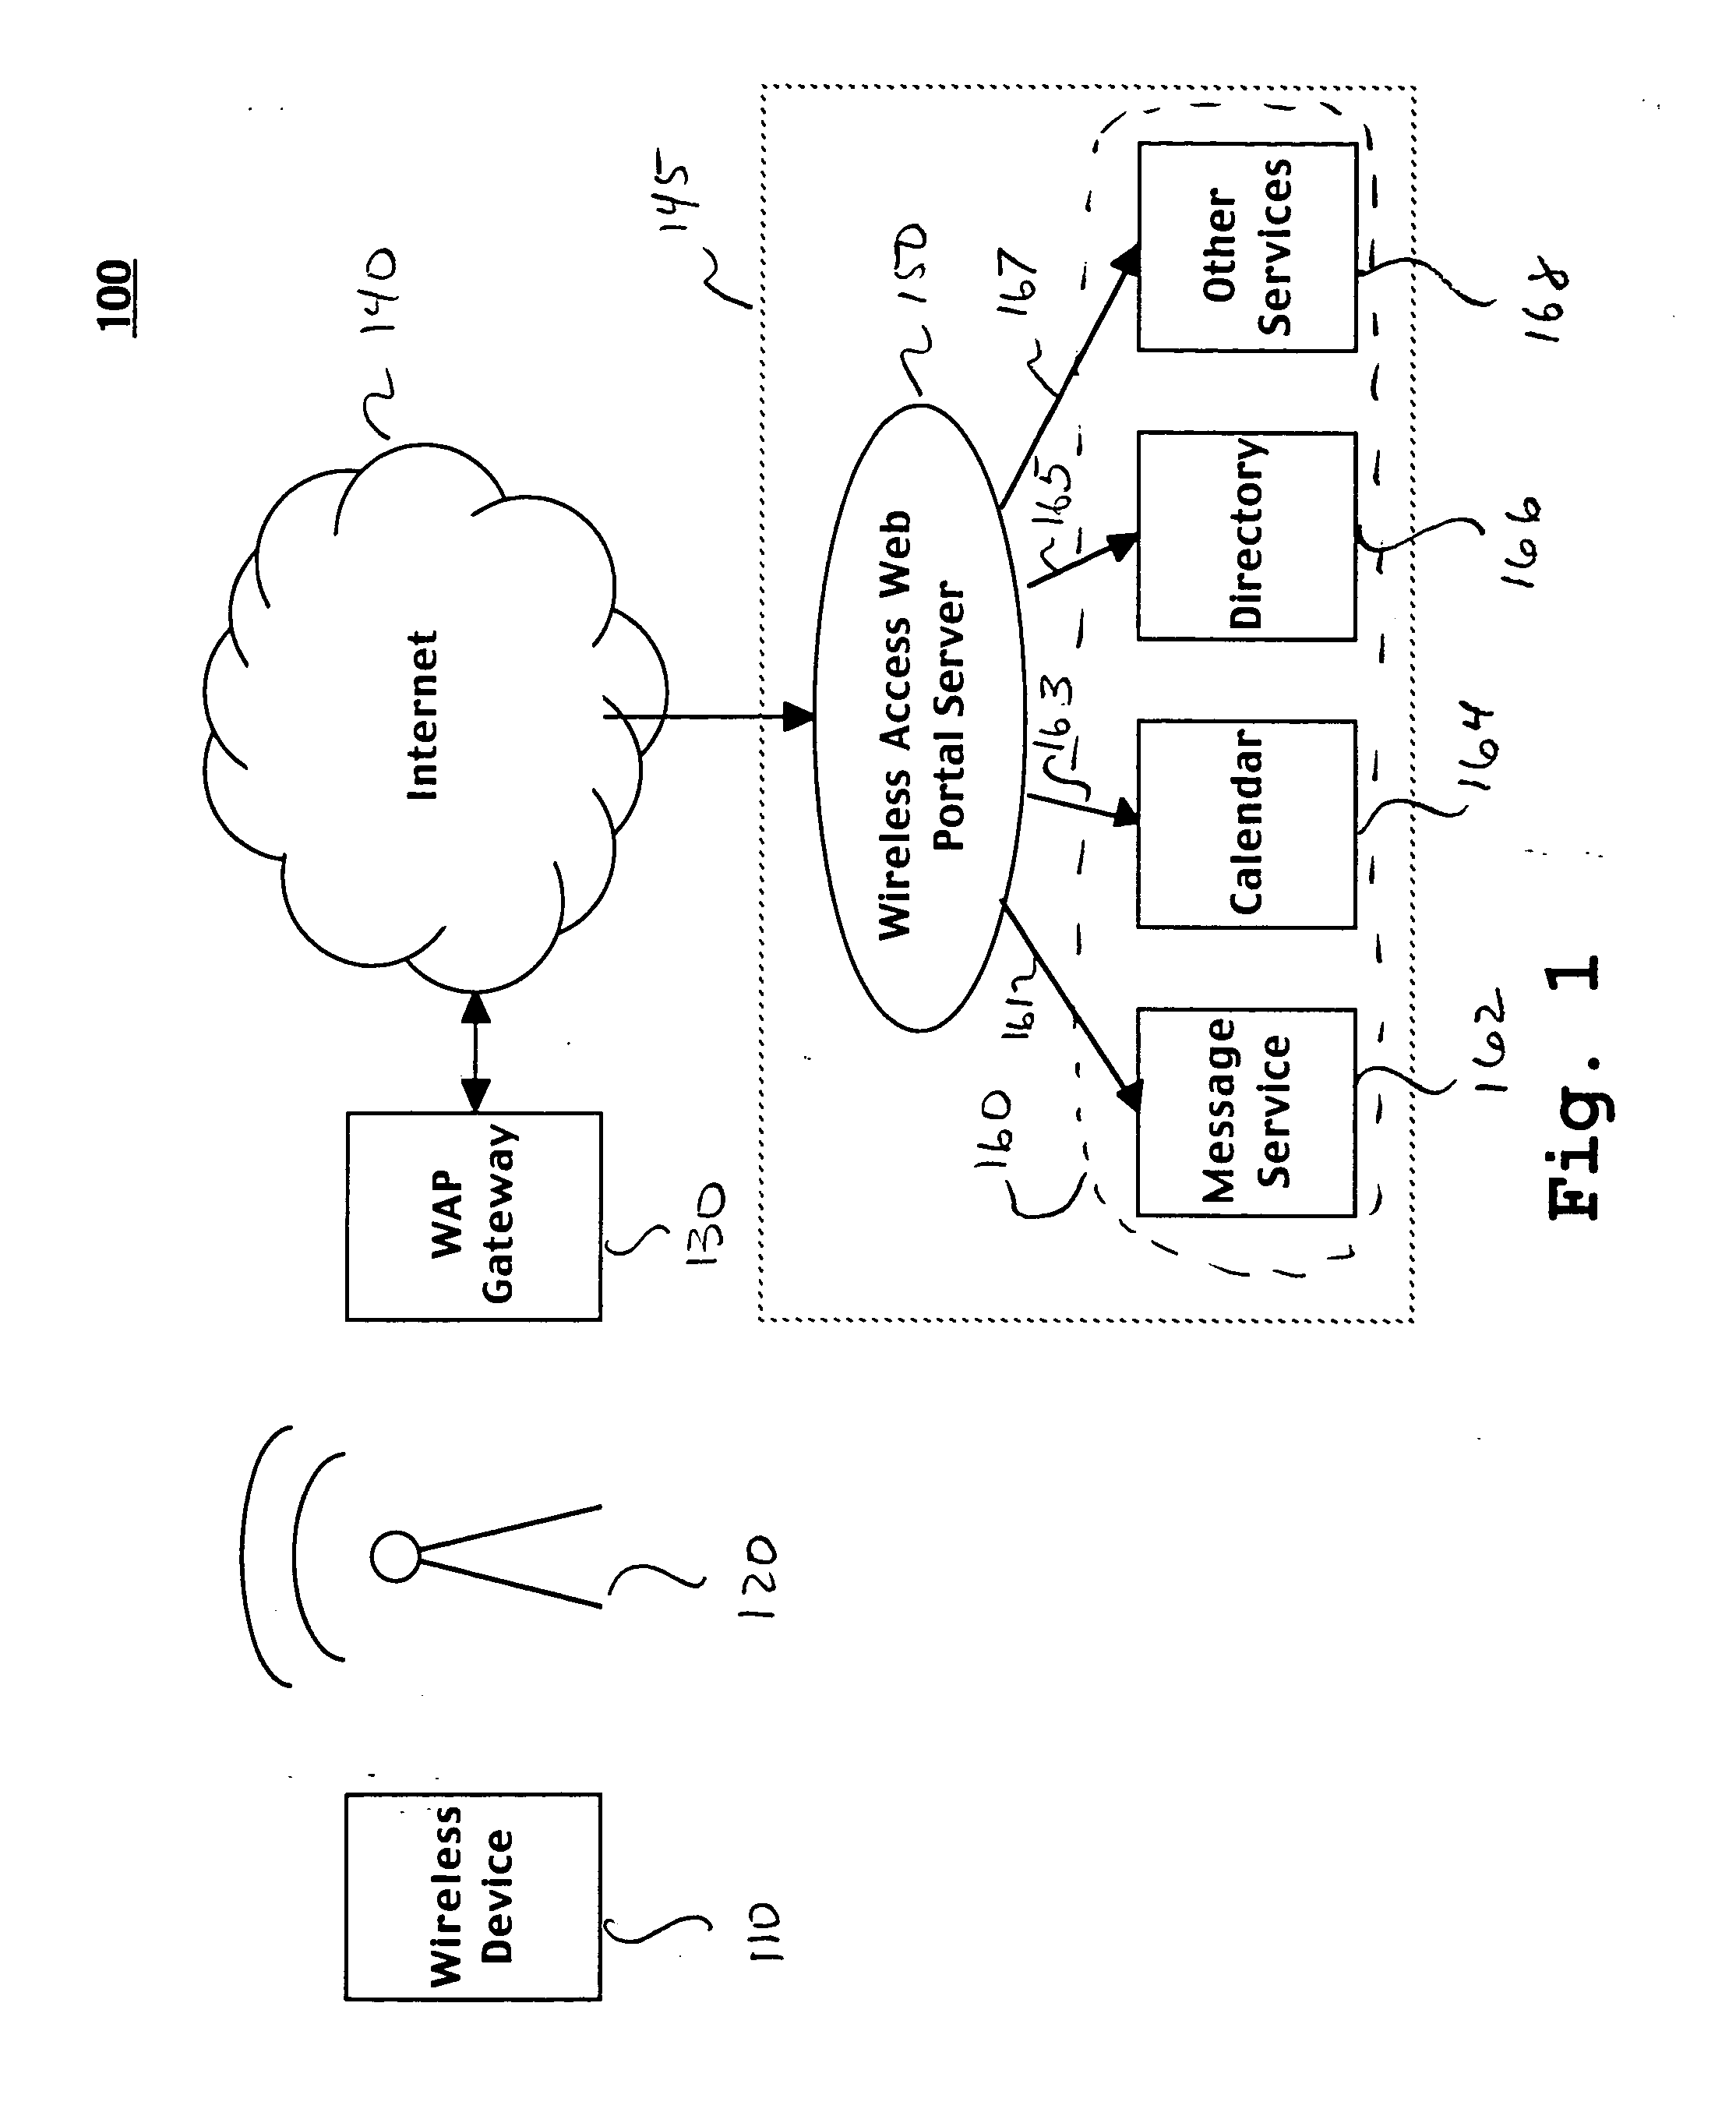 Method and system for storing and retrieving extensible multi-dimensional display property configurations